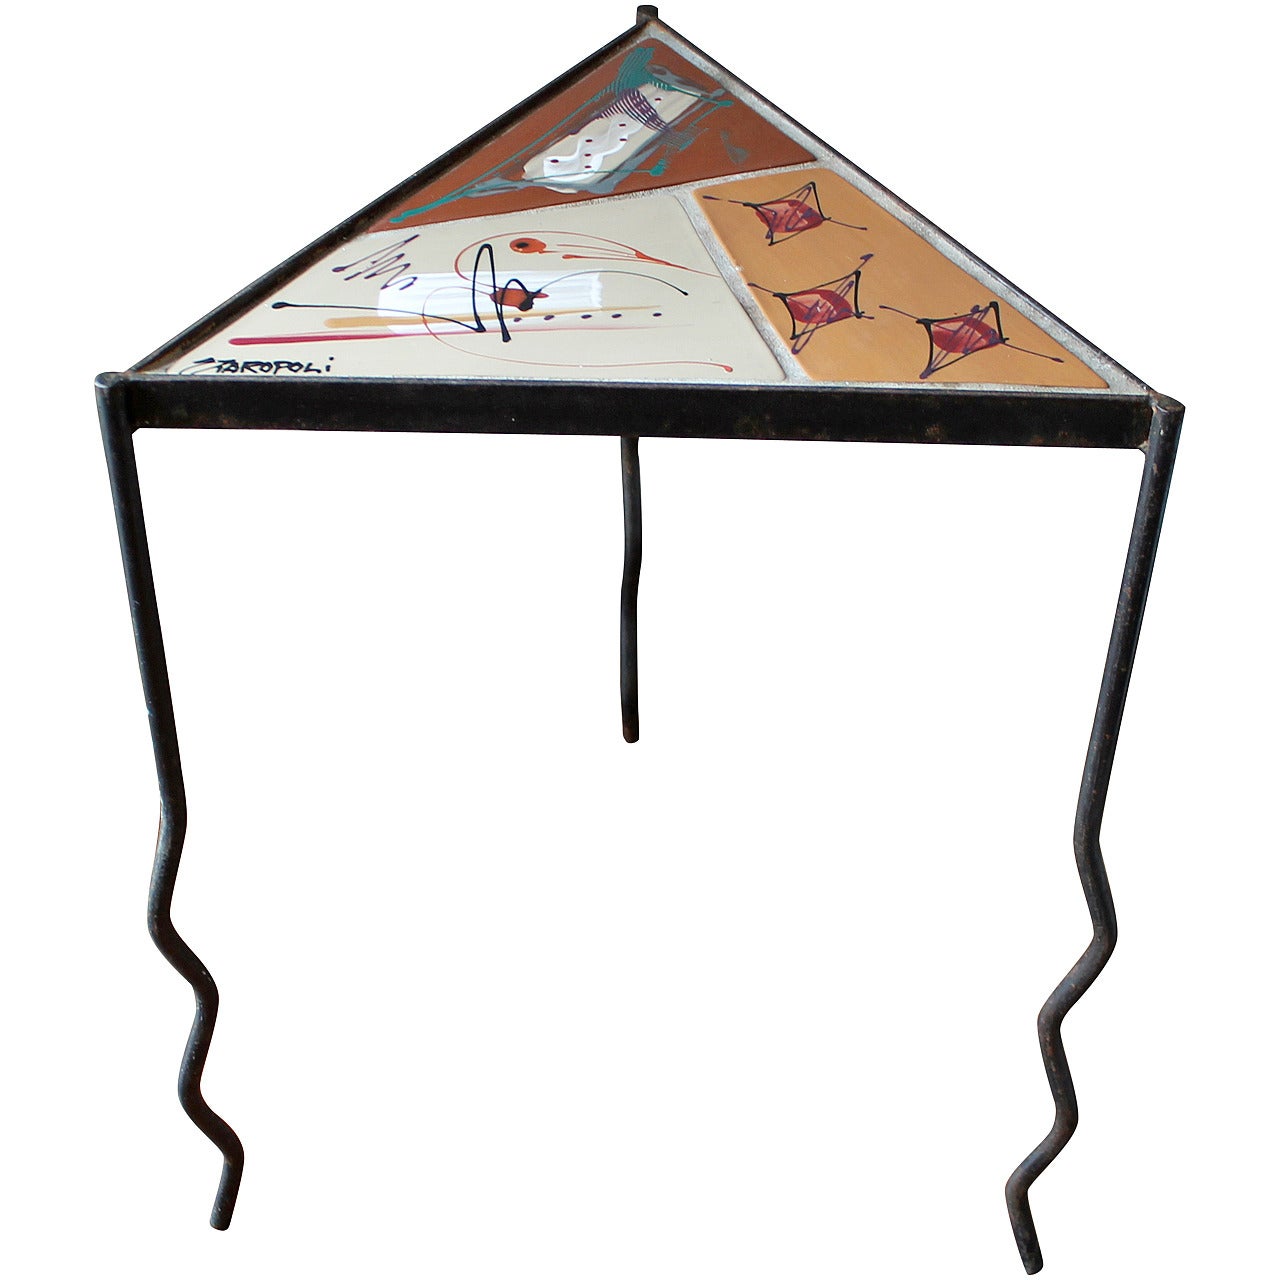 1960s Italian Iron and Tile Top Triangular Side Table For Sale